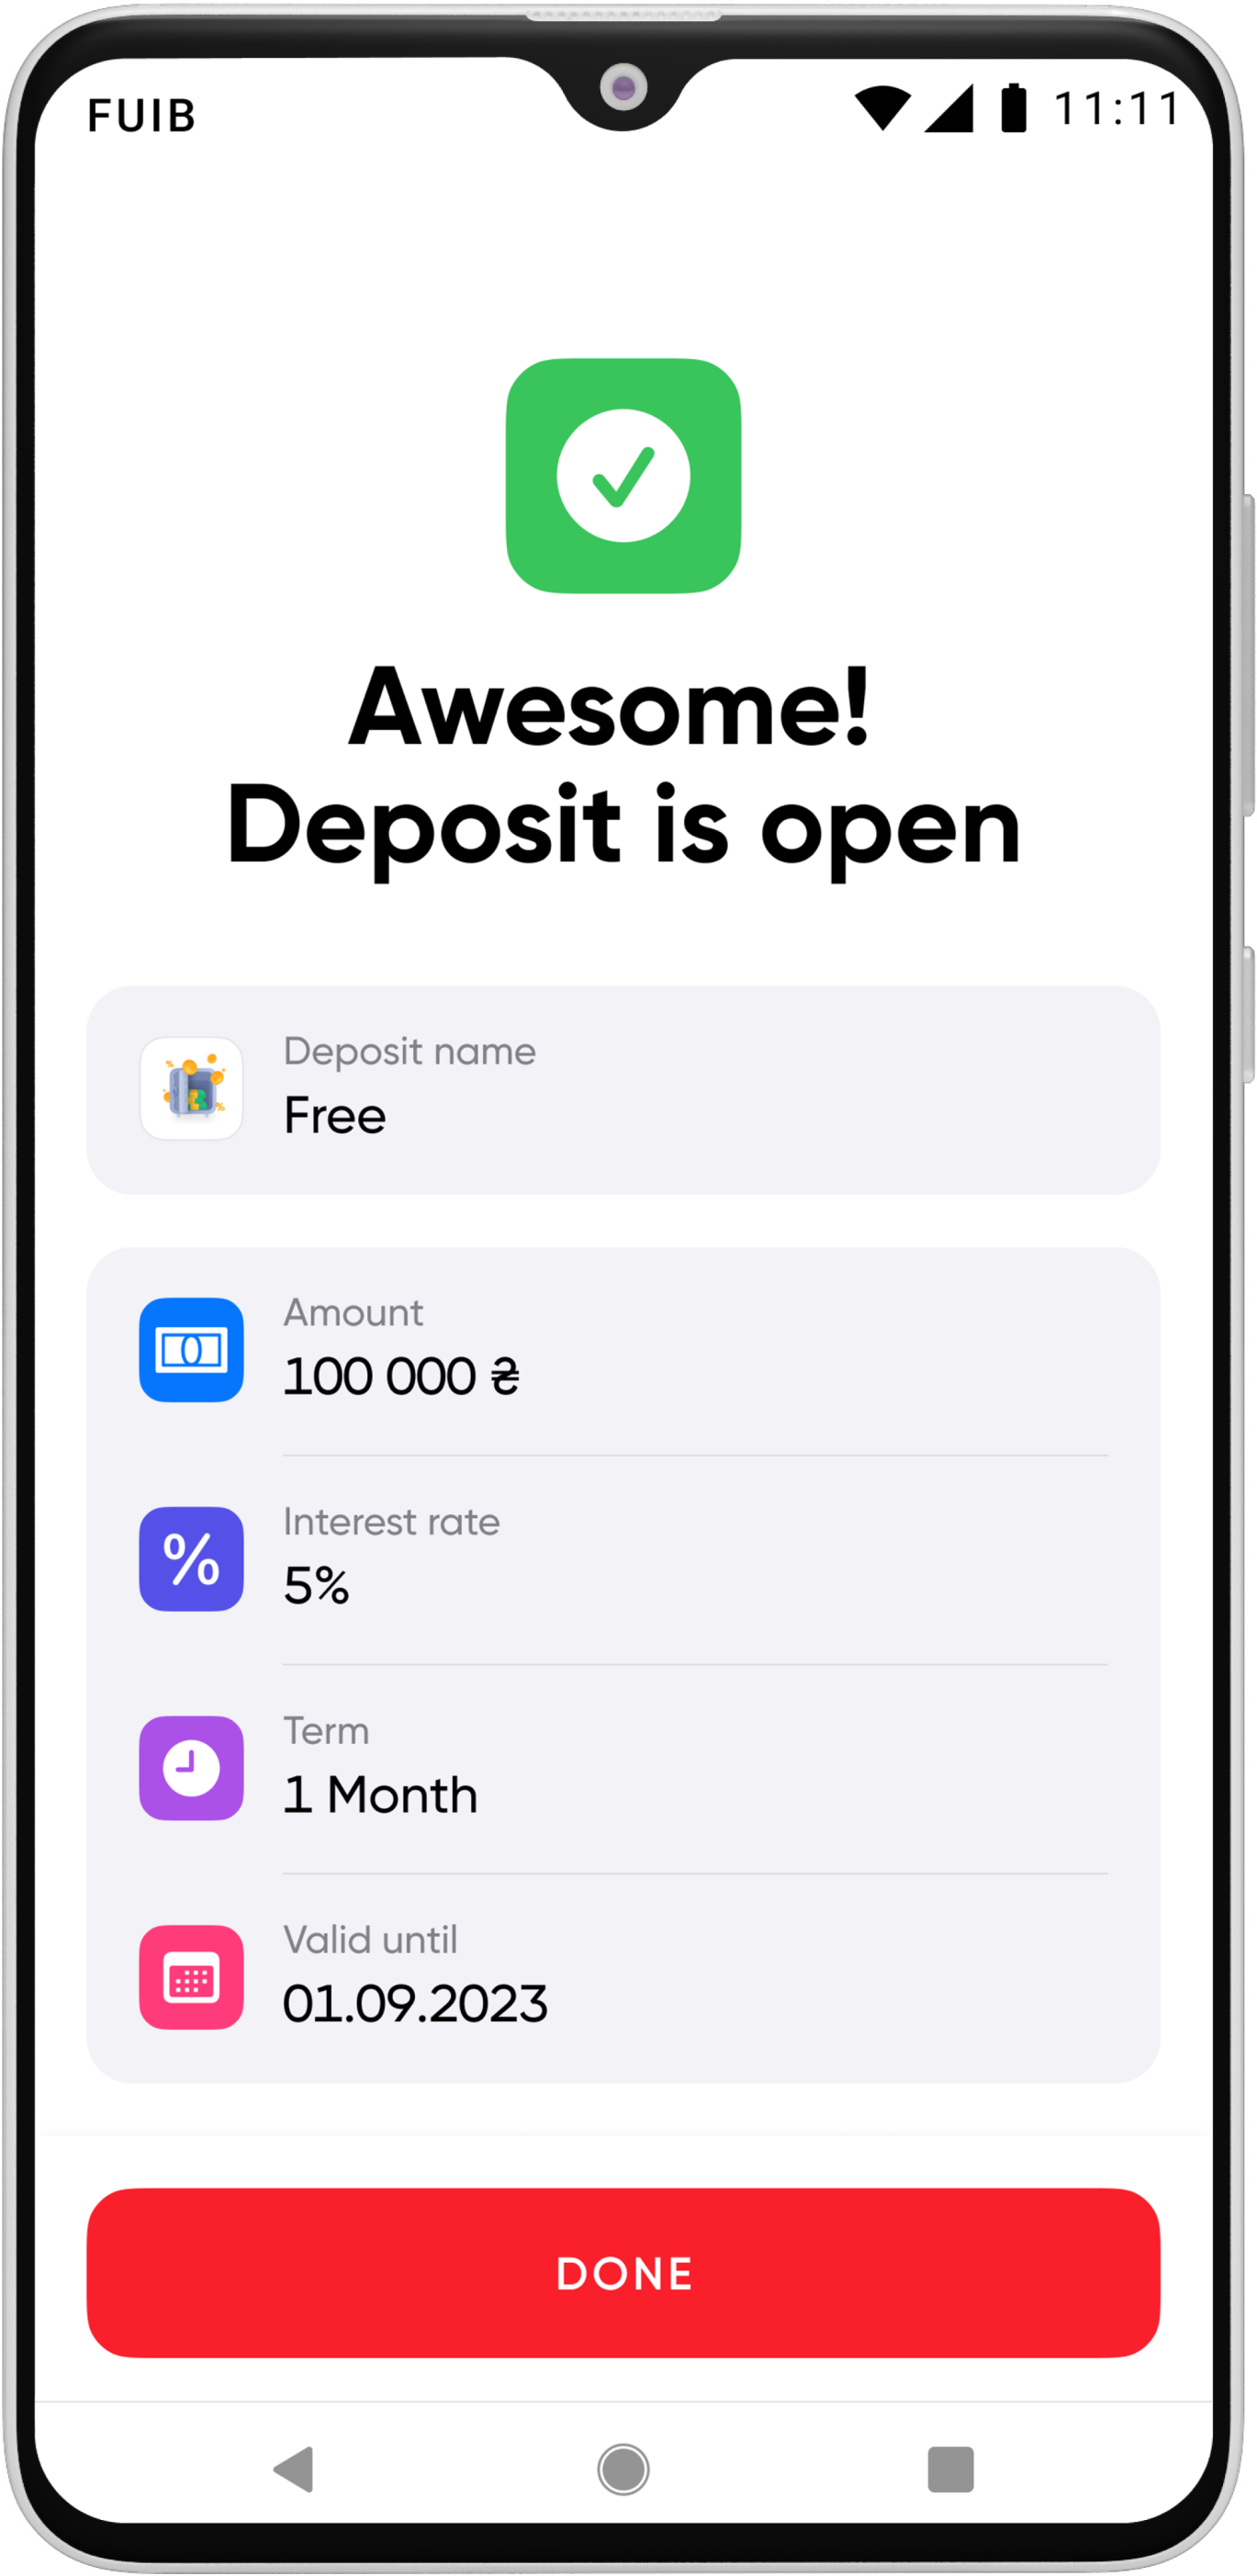 After opening a deposit, you will see a message about the successful opening 